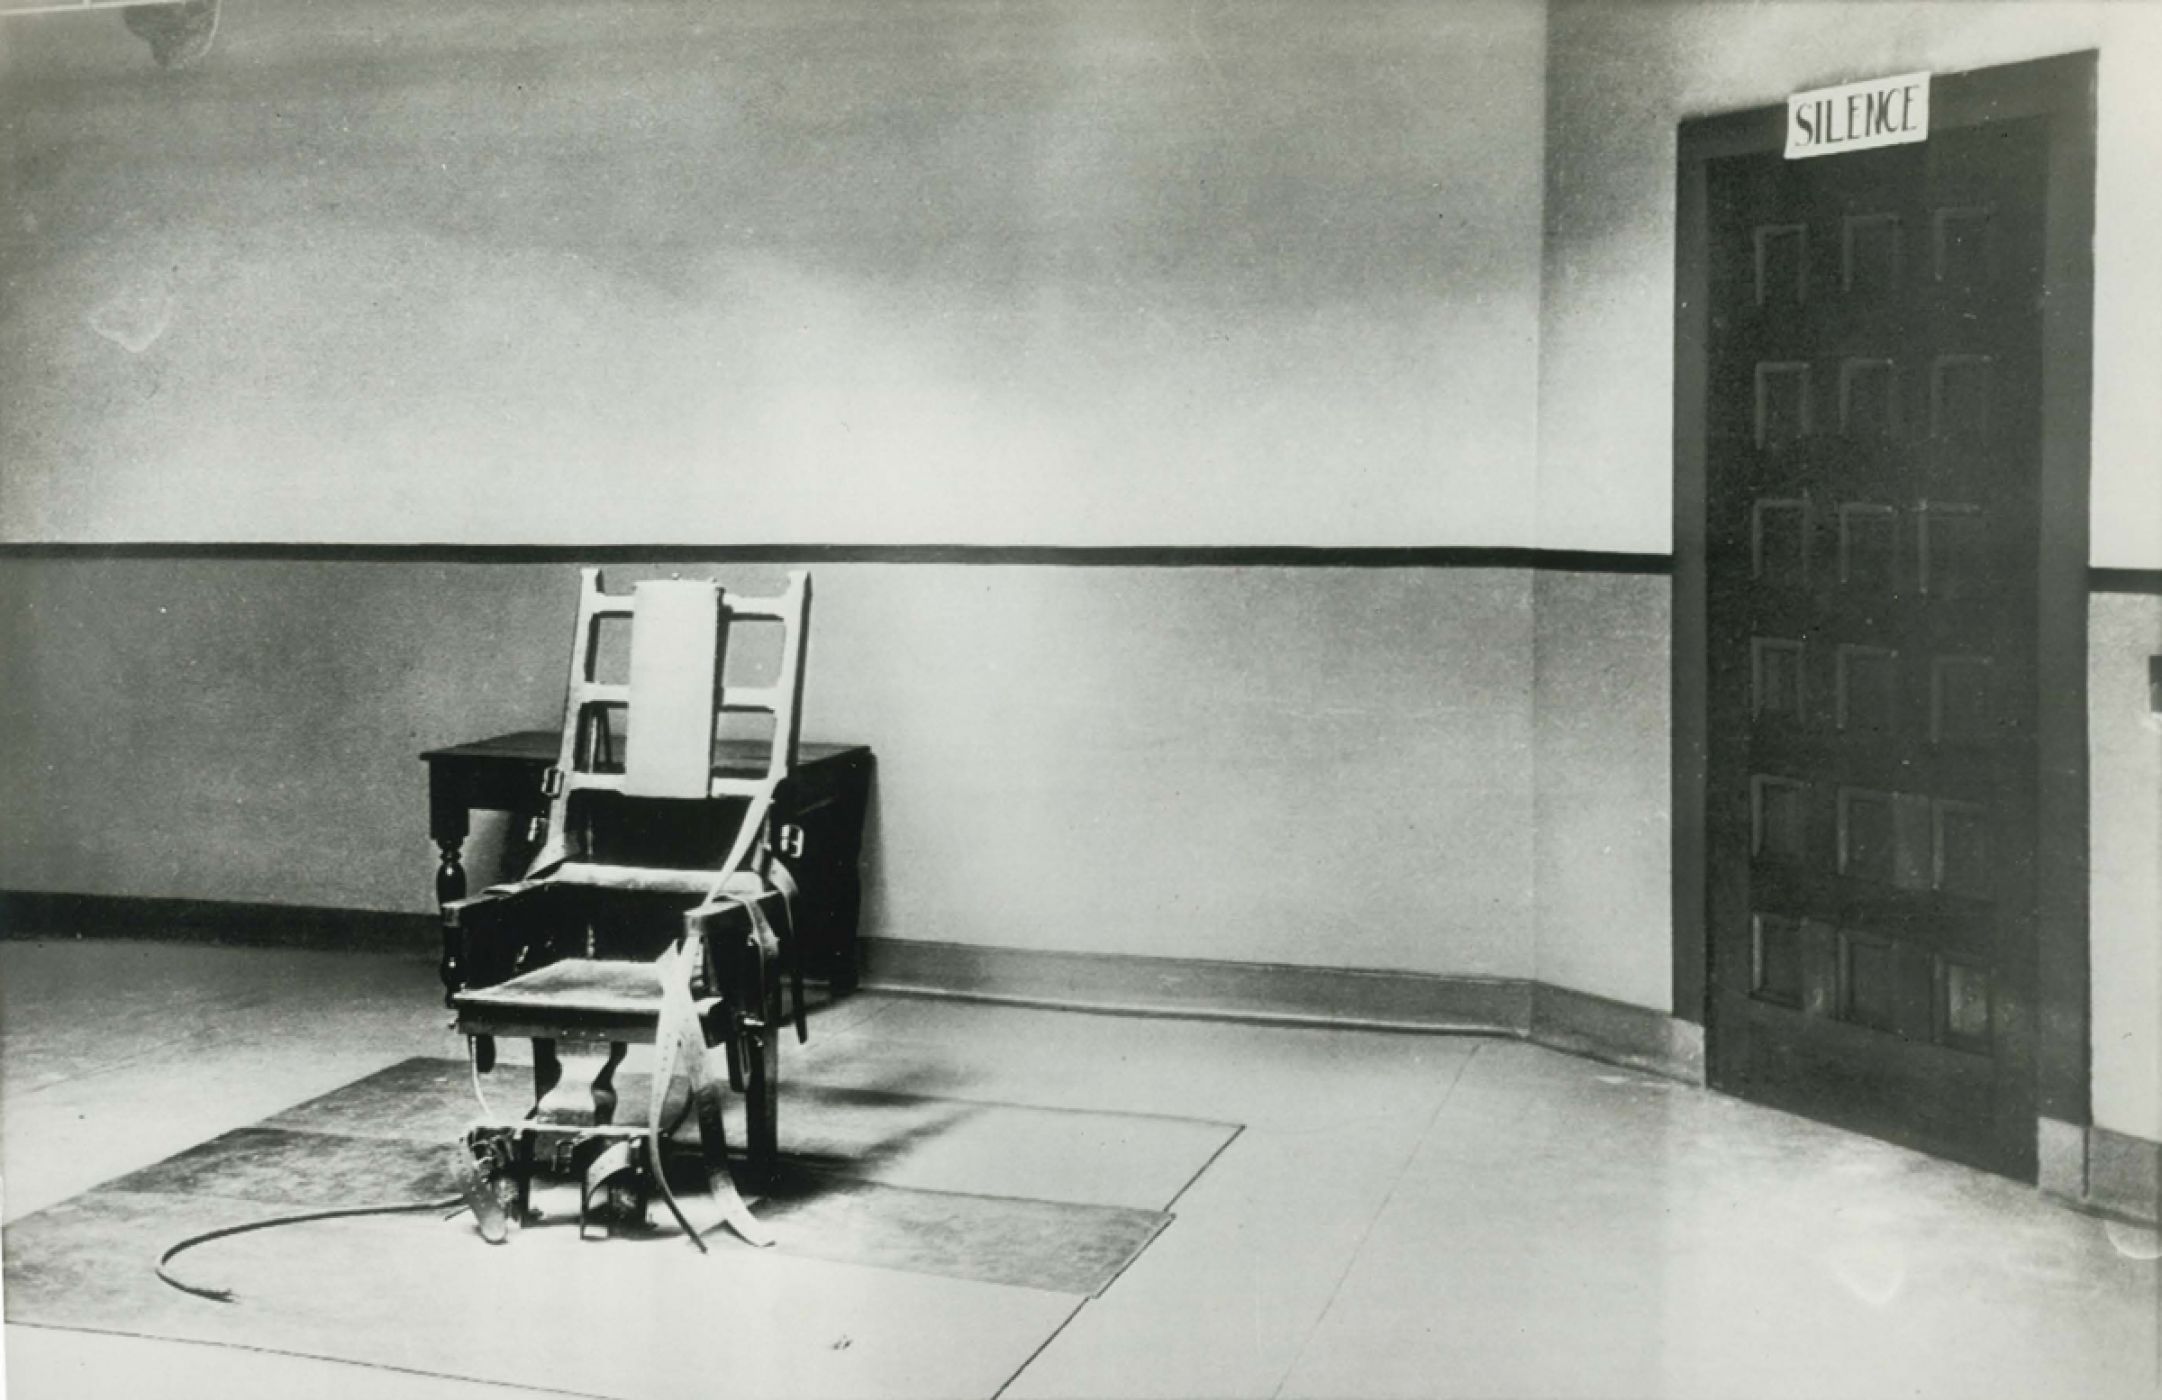 Anonymous, “Where the Rosenbergs are slated to die, Electric chair in Sing Sing Prison”, 1953